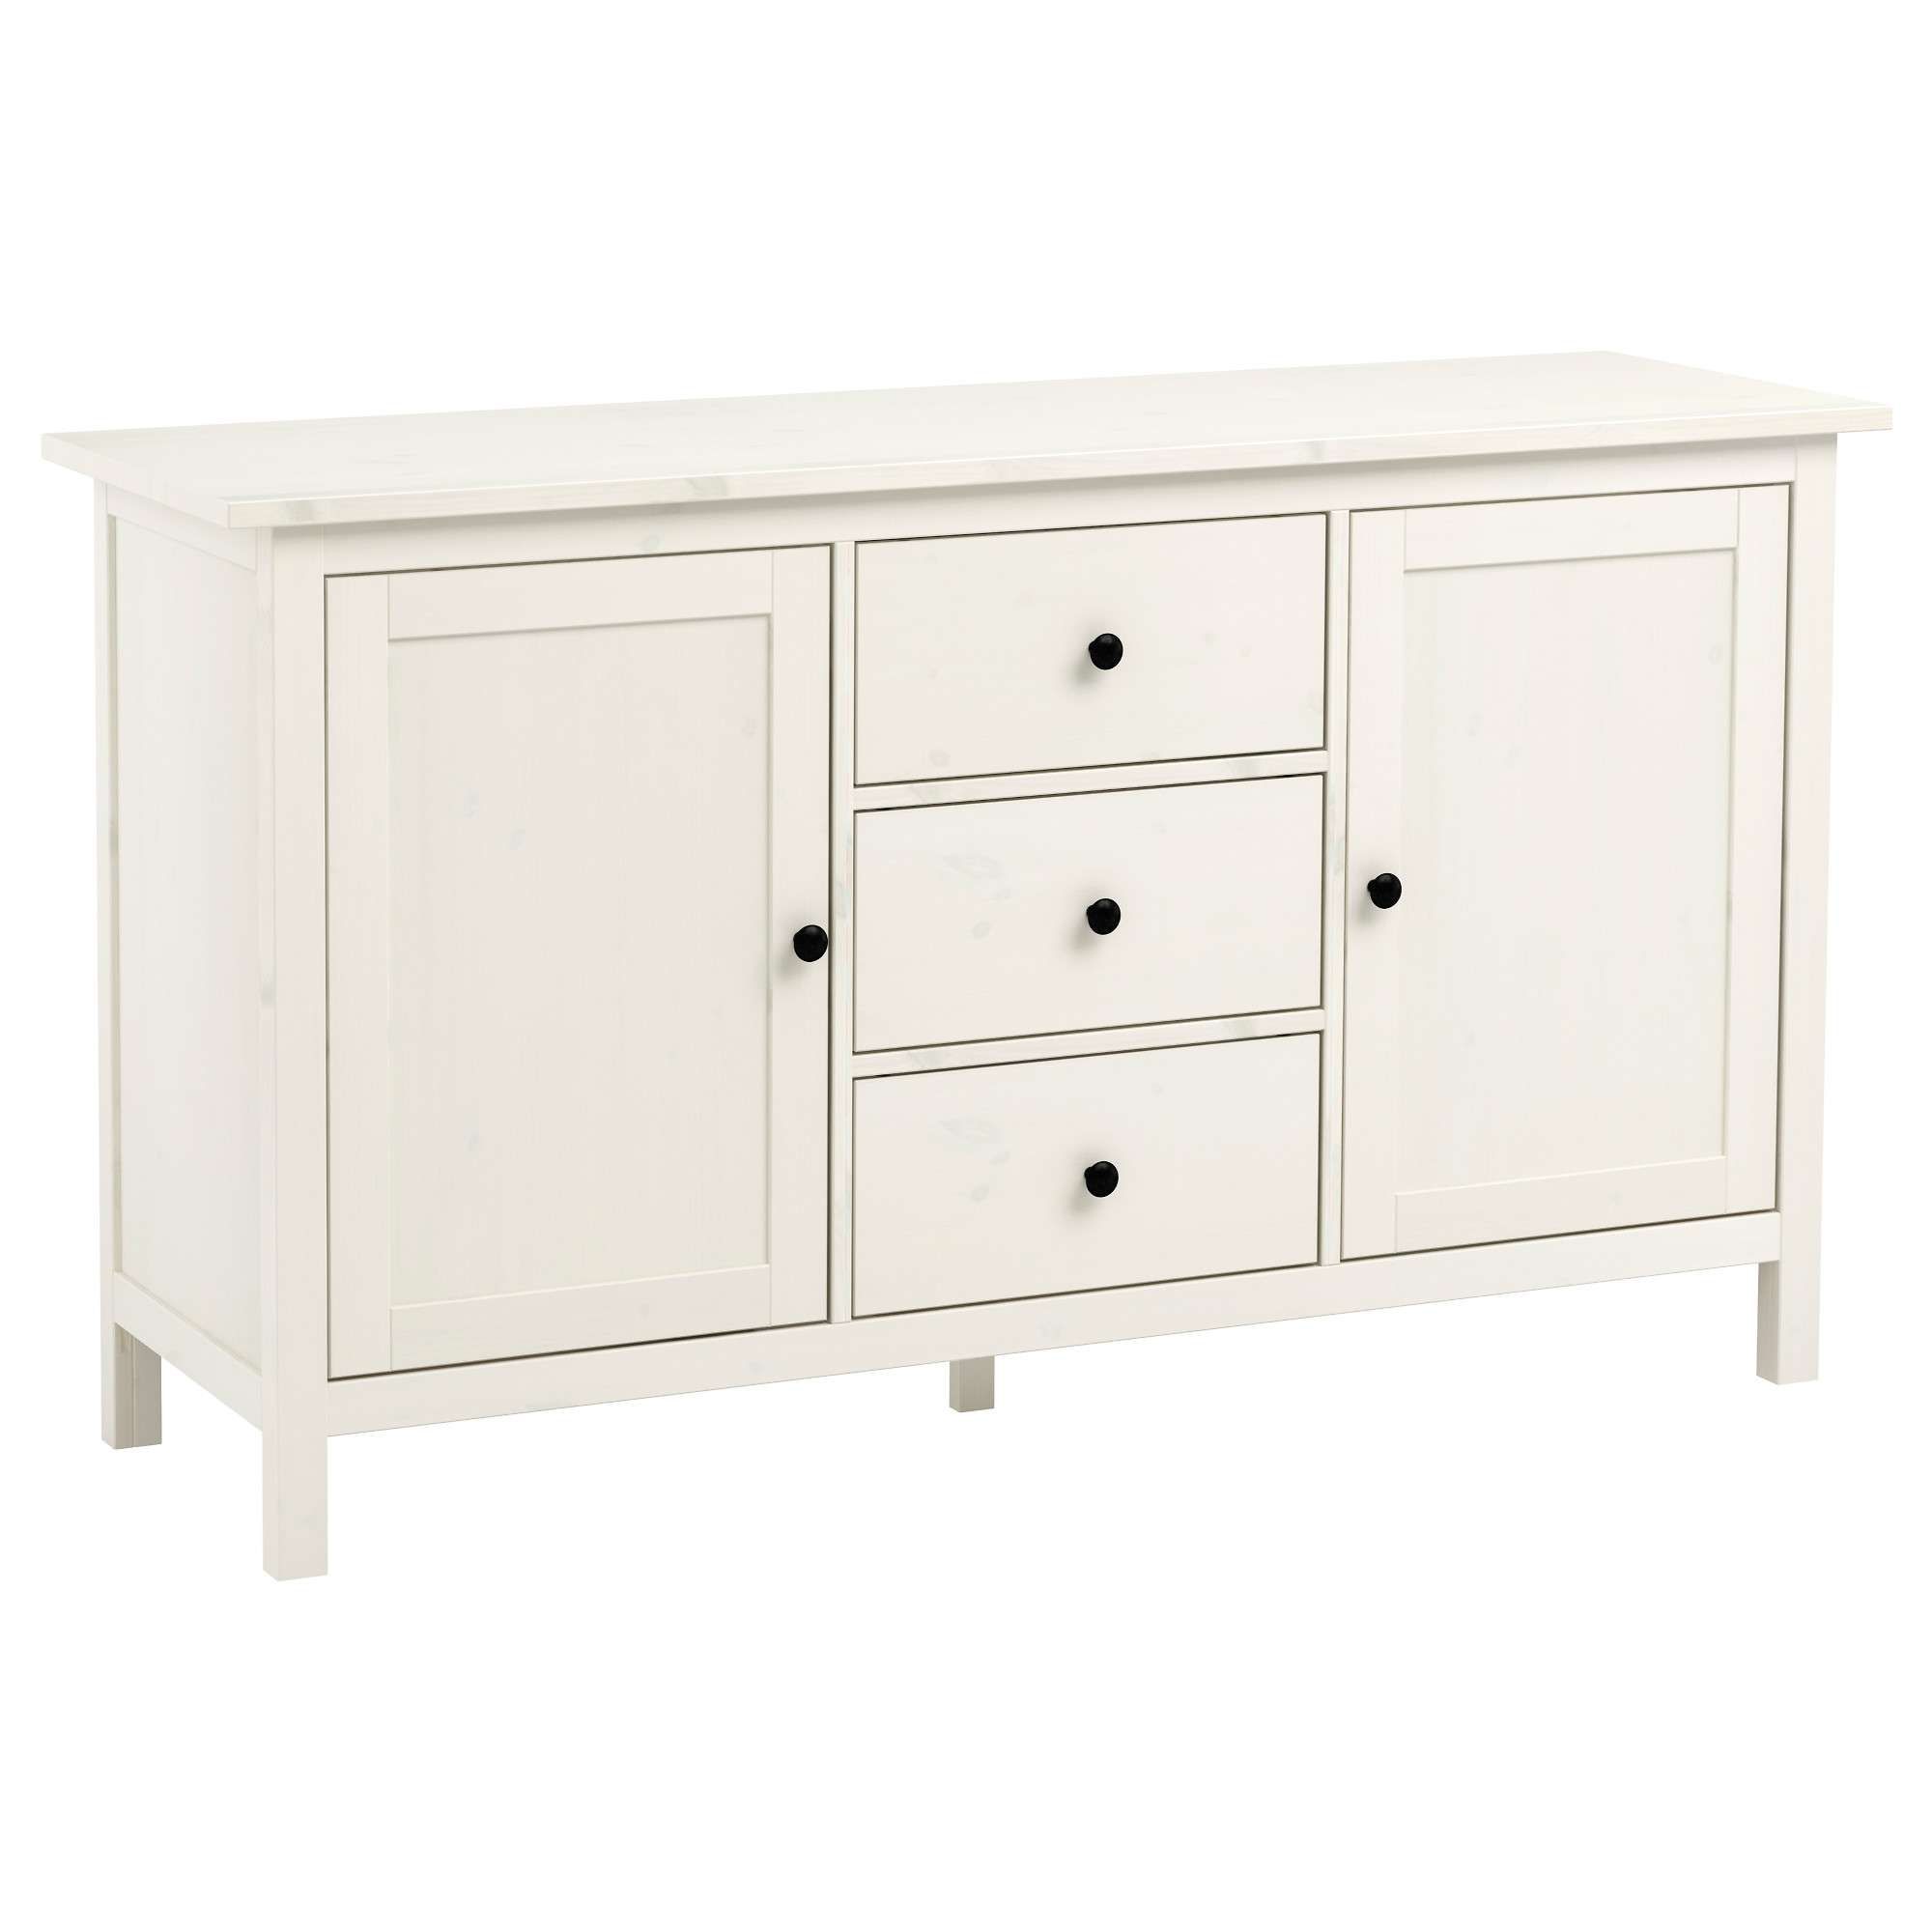 Hemnes Sideboard White Stain 157x88 Cm – Ikea For Ikea Sideboards (View 4 of 20)